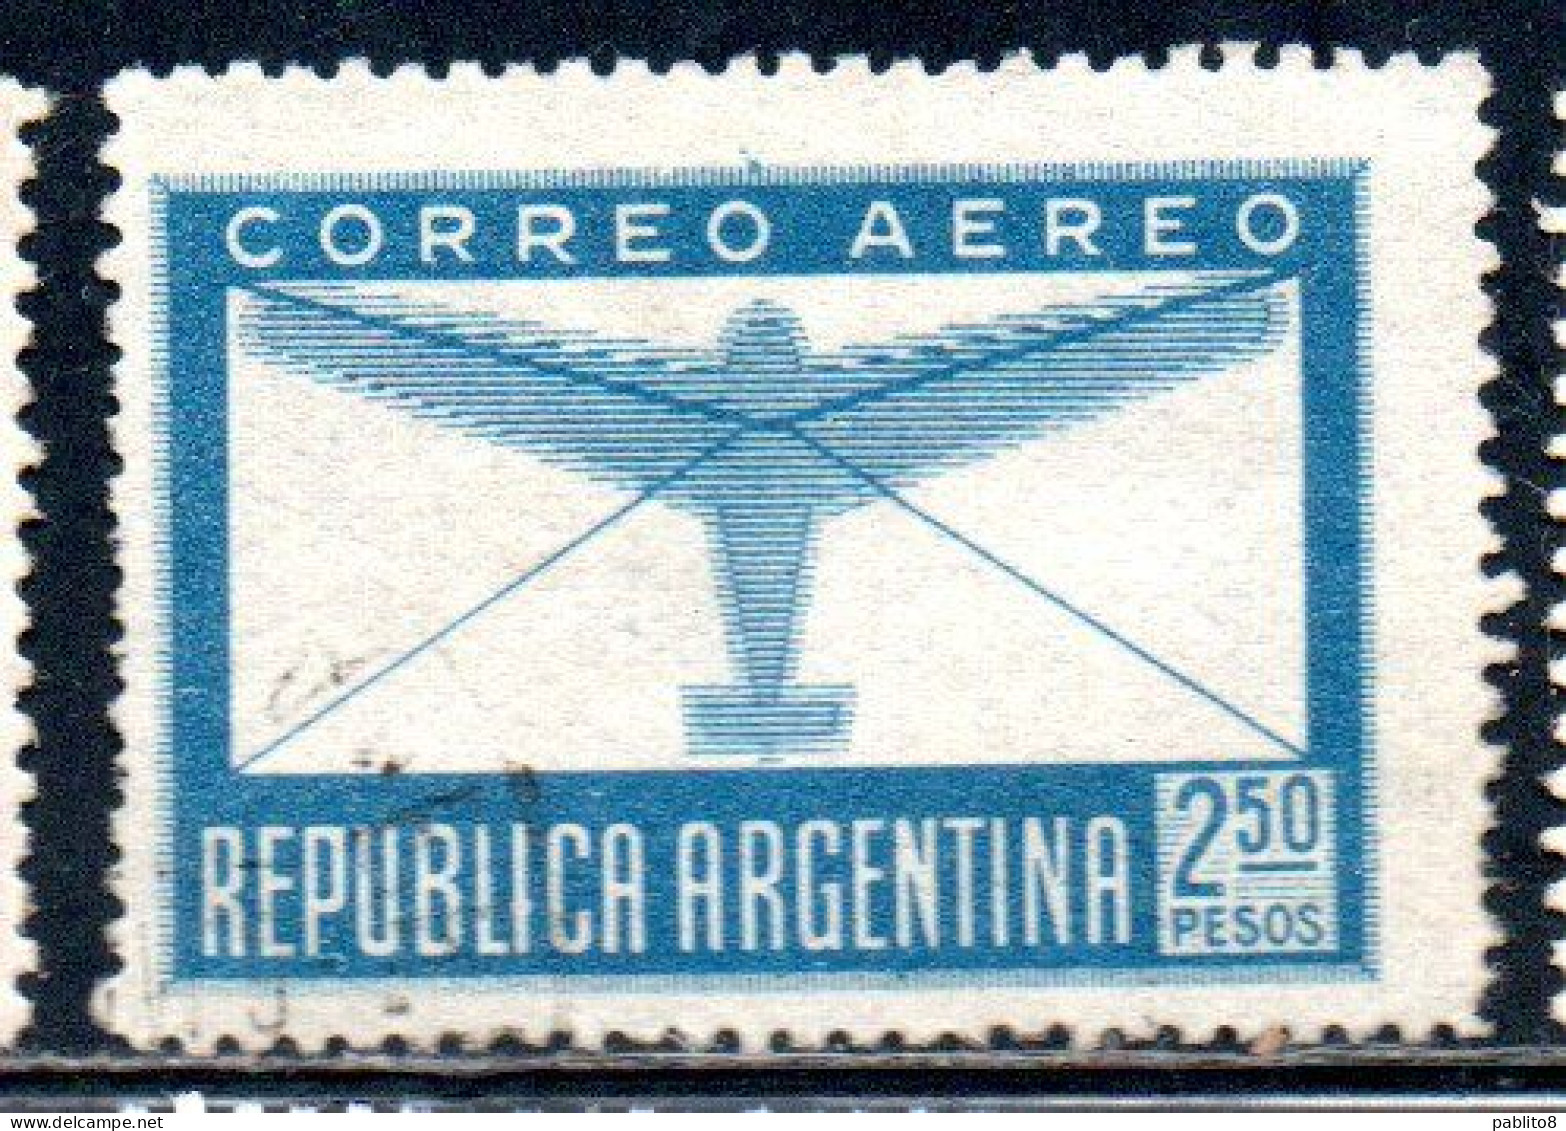 ARGENTINA 1940  AIR POST MAIL CORREO AEREO AIRMAIL PLANE AND LETTER 2.50p USED USADO OBLITERE' - Aéreo